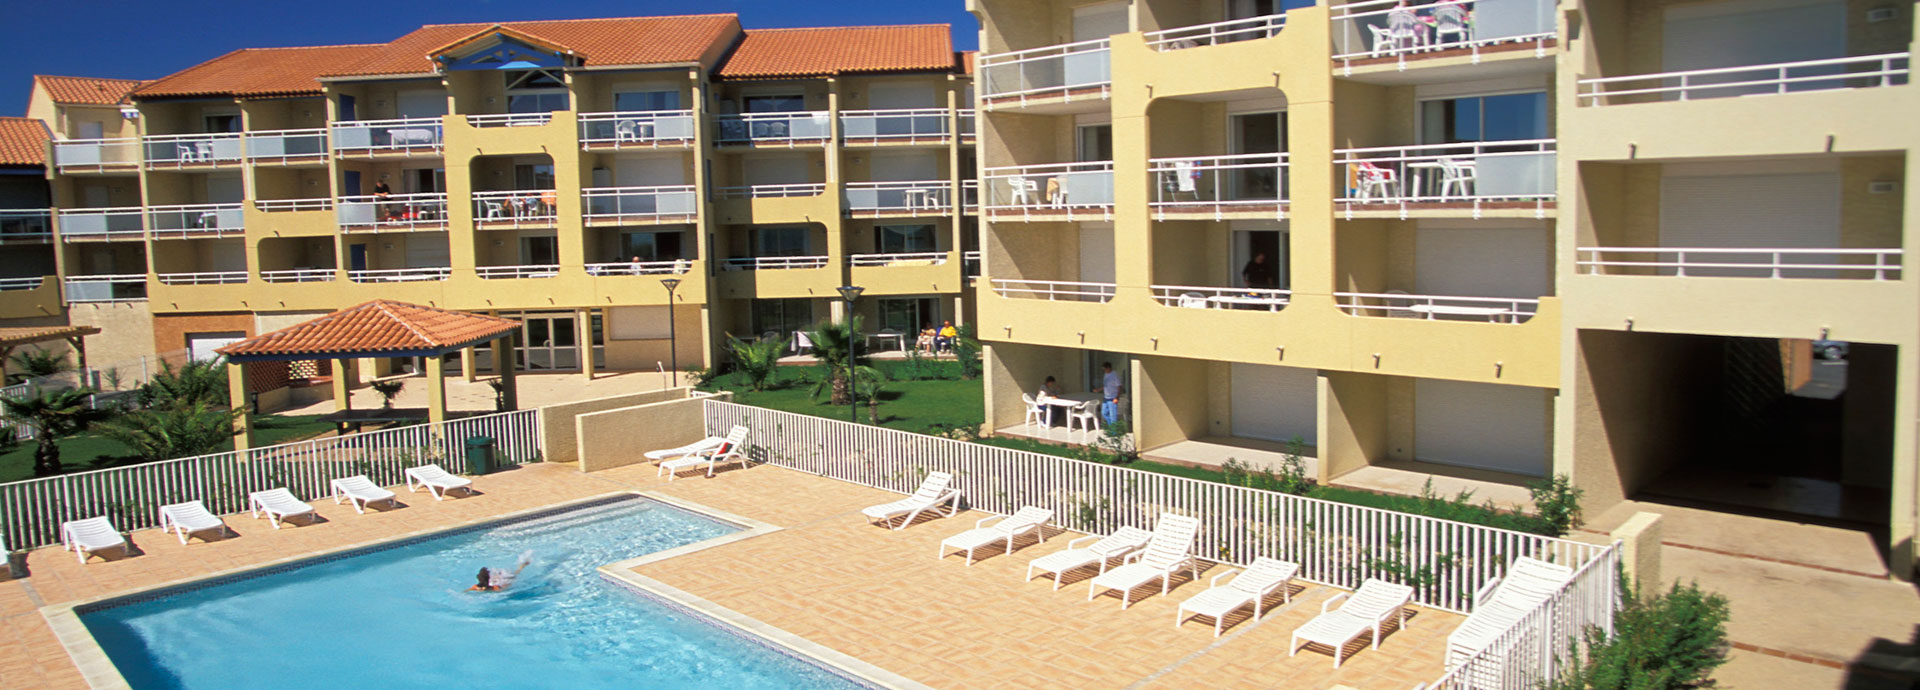 Holiday rental at Valras : Alizea Beach residence